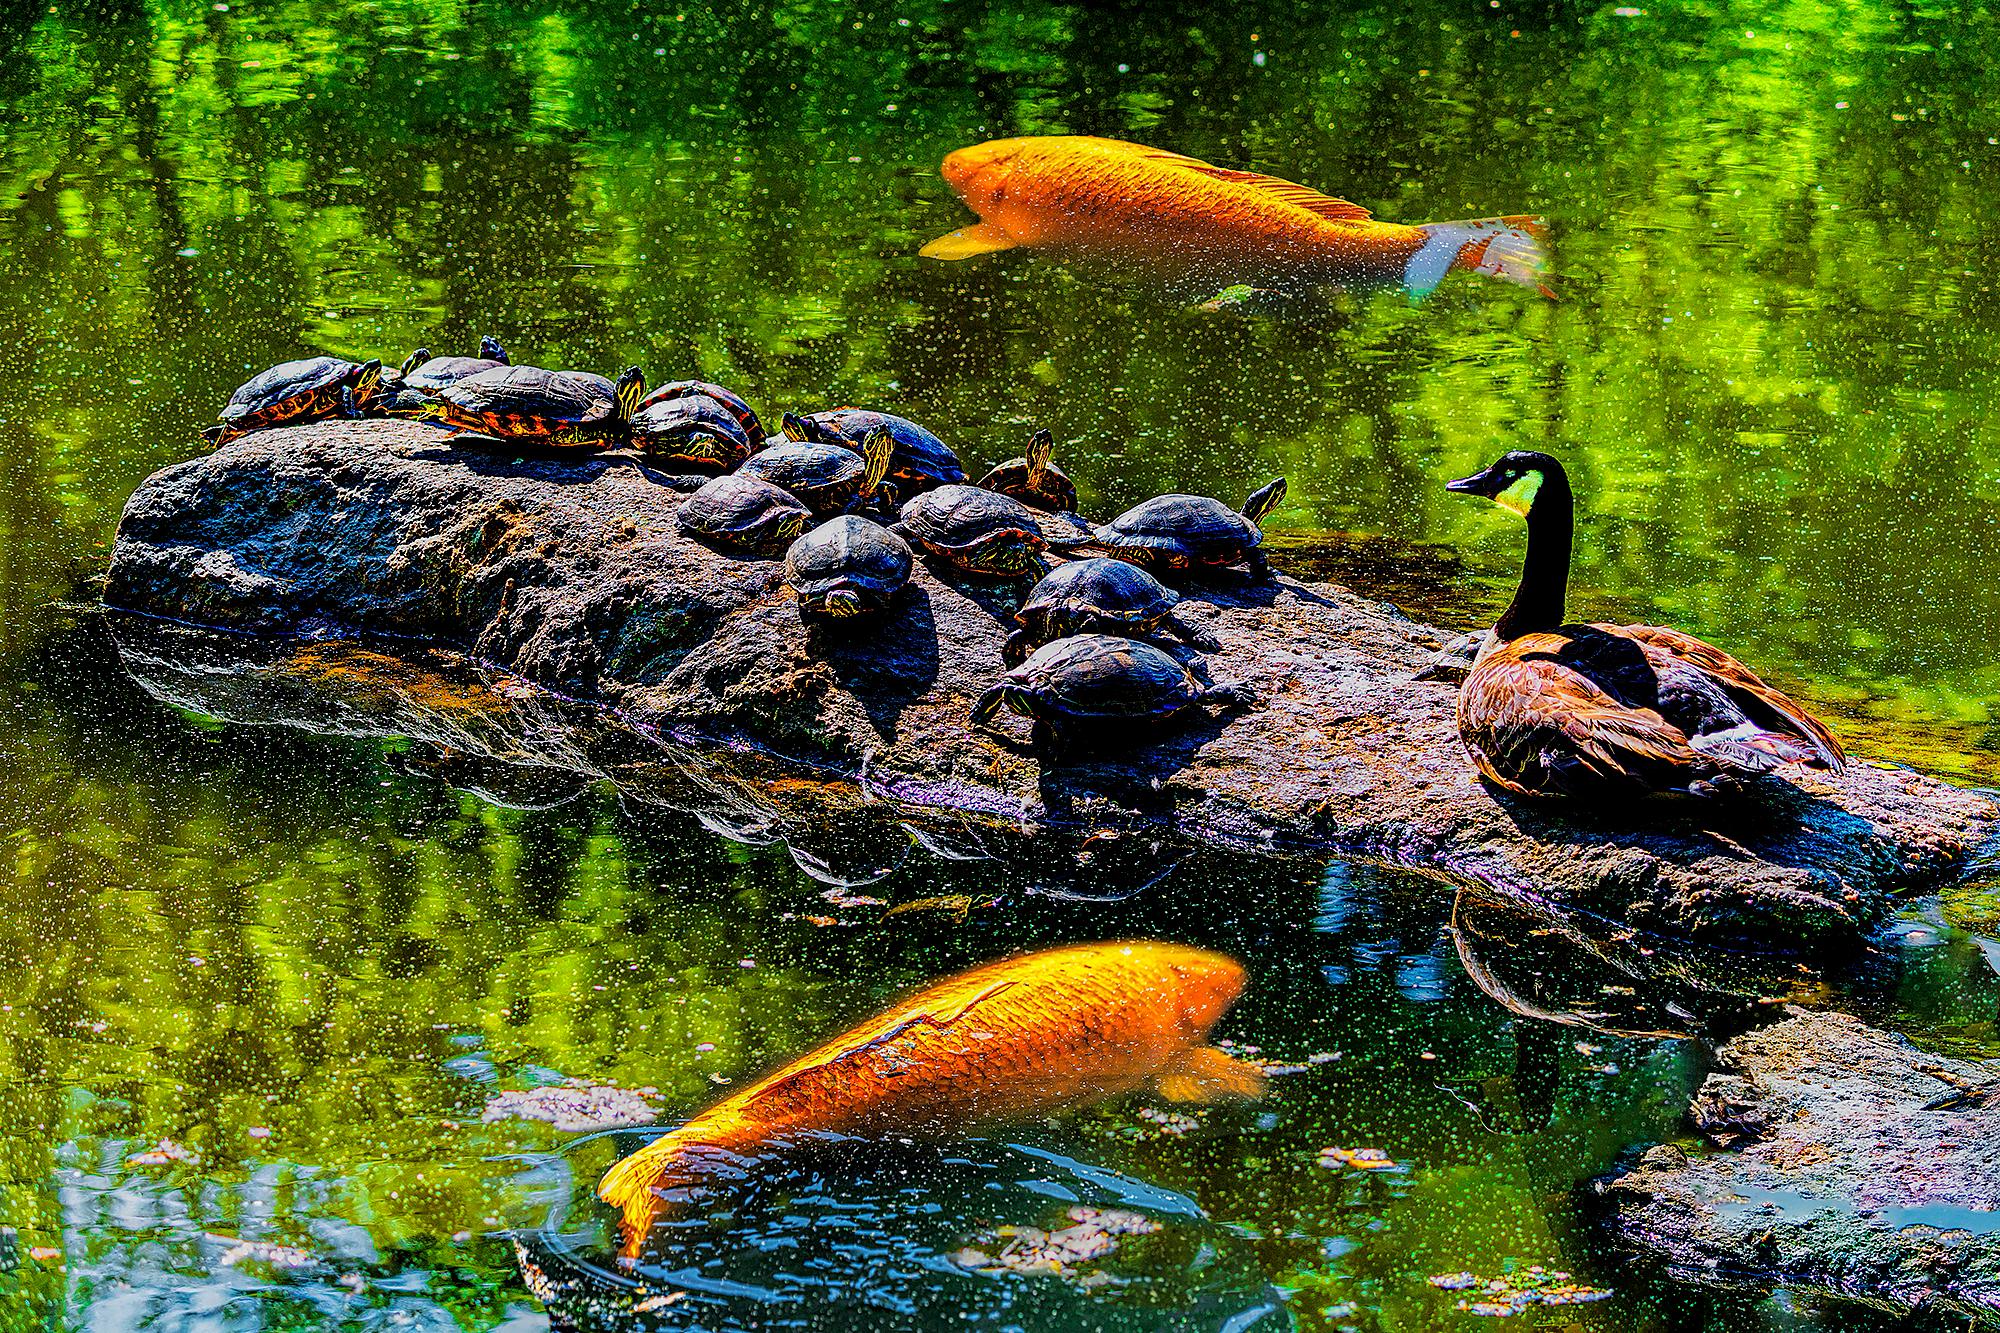 Duck, Turtles and Gold Fish in Central Park Pond Basking in Sun